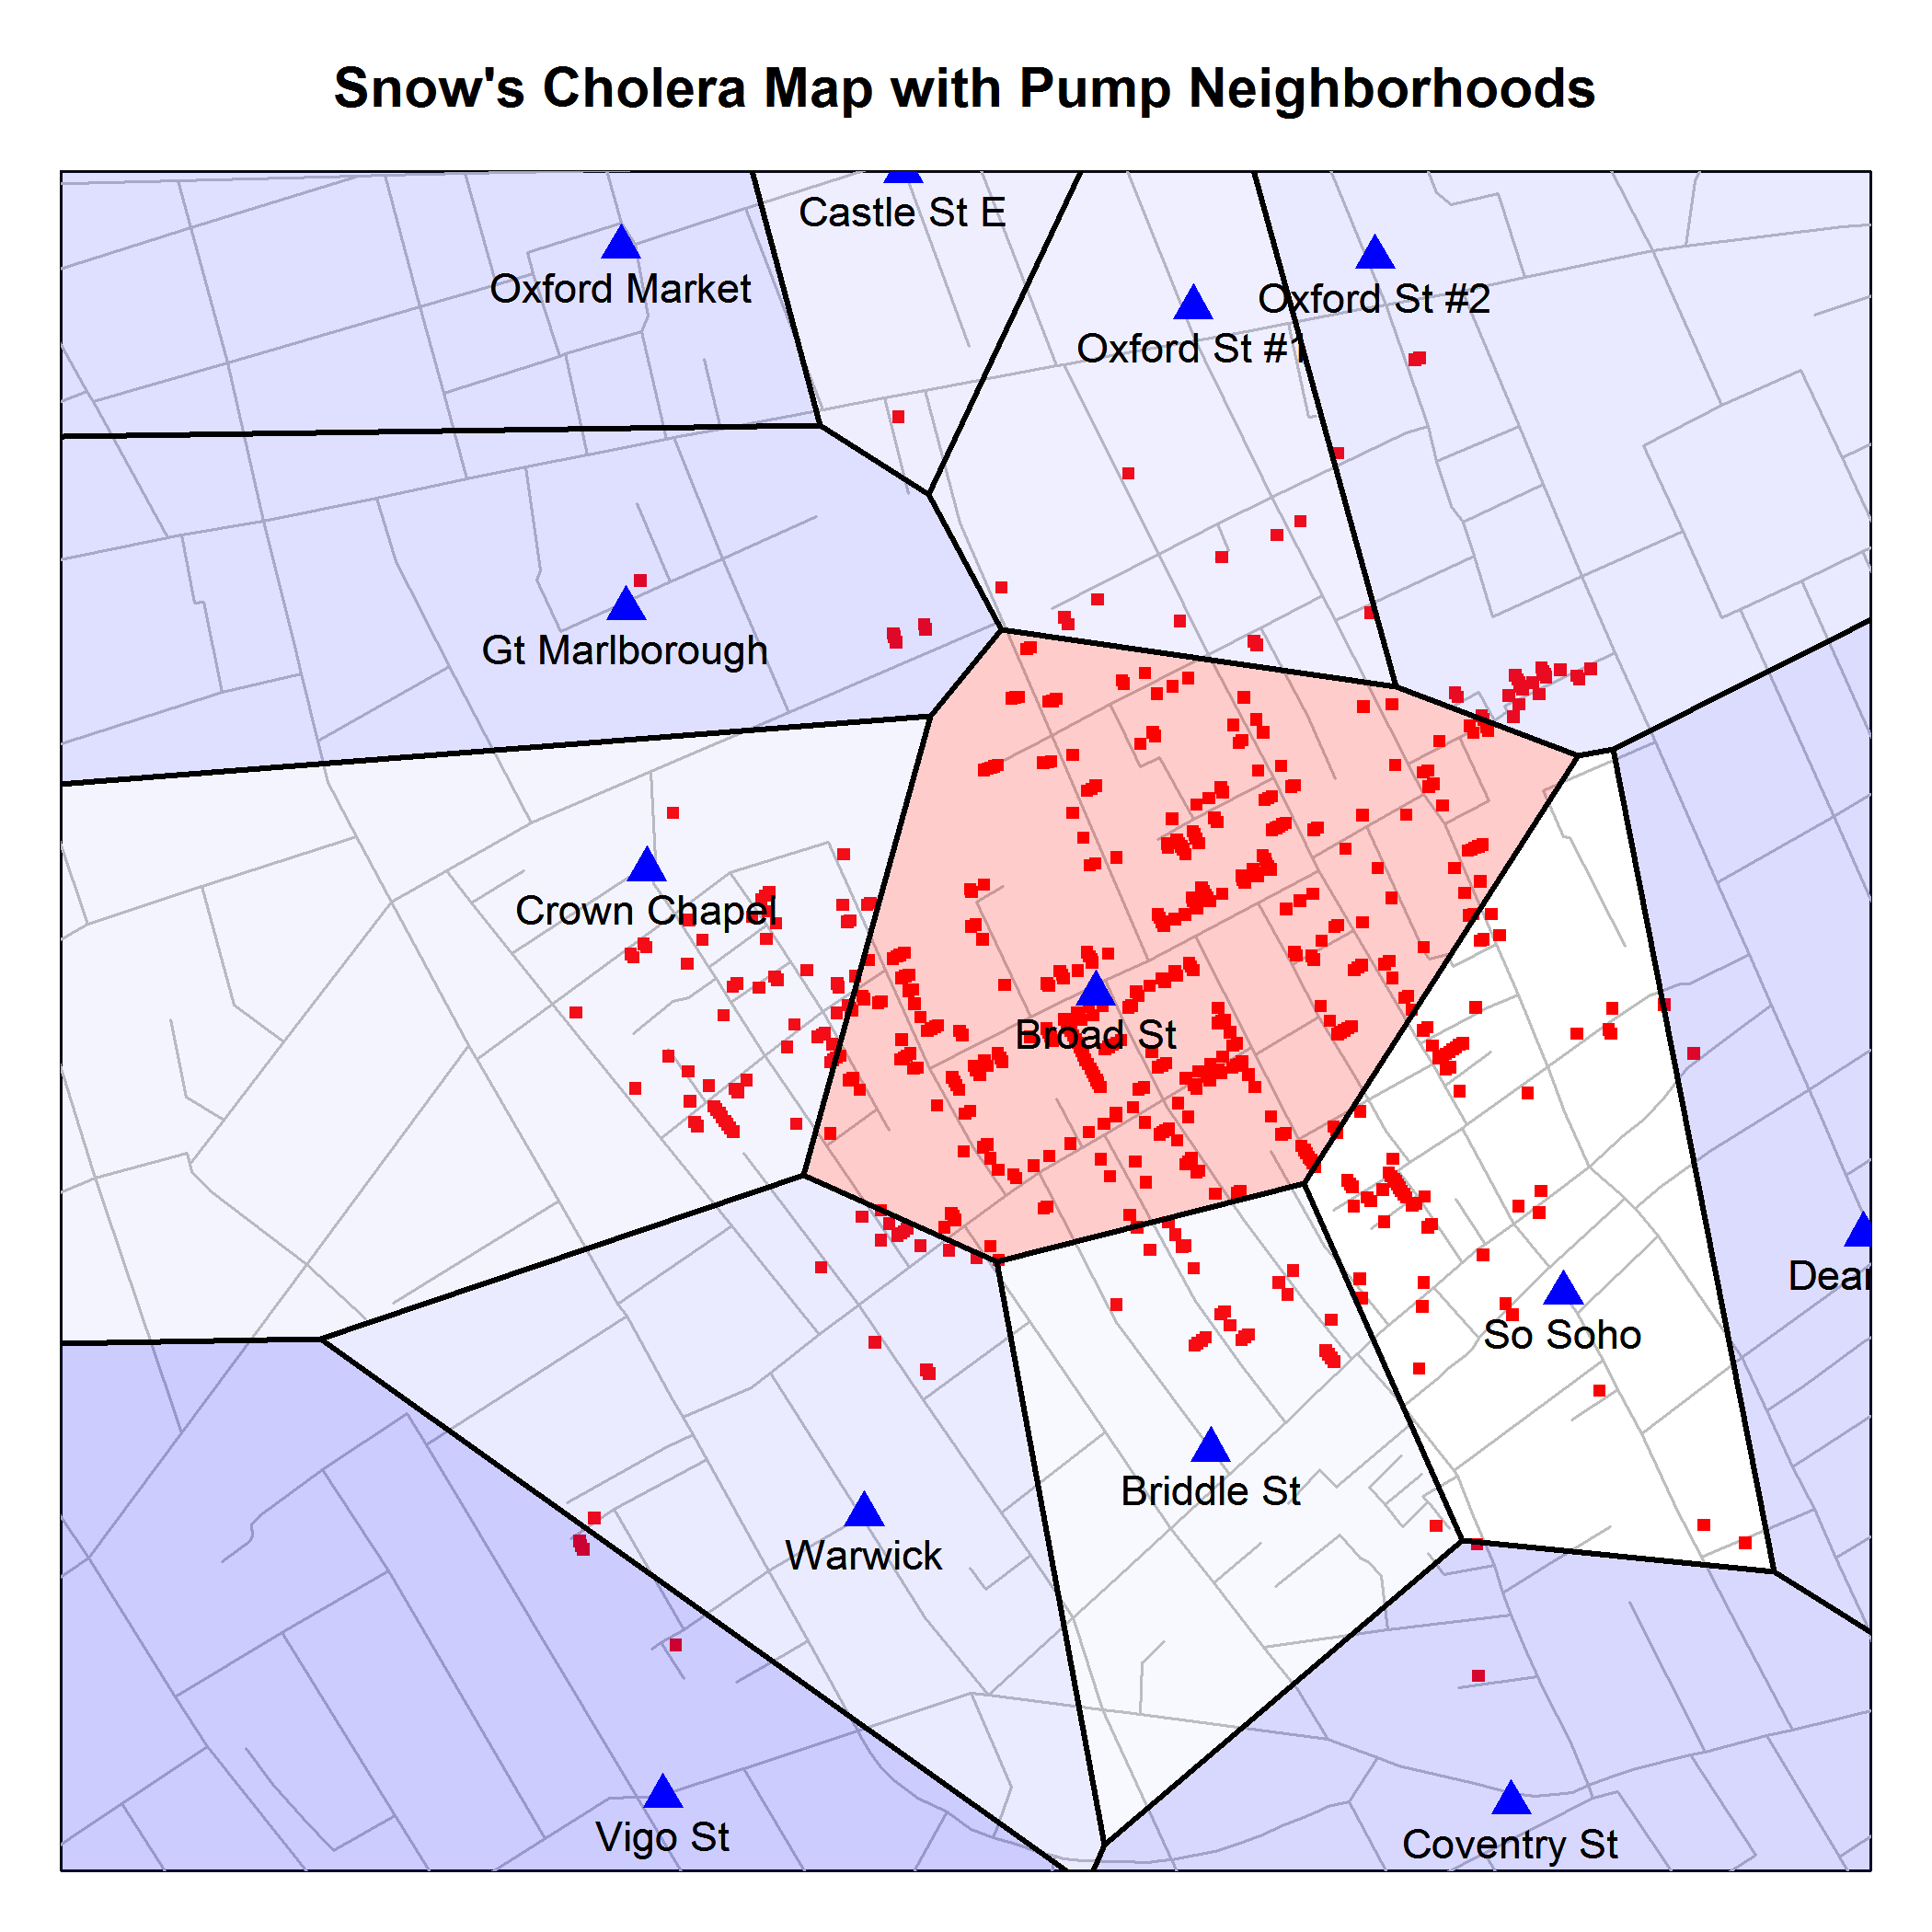 Snow’s map enhanced: Re-drawn and enhanced versions of a central portion of Snow’s map of the cholera data using the most historically accurate known data digitized from the map.